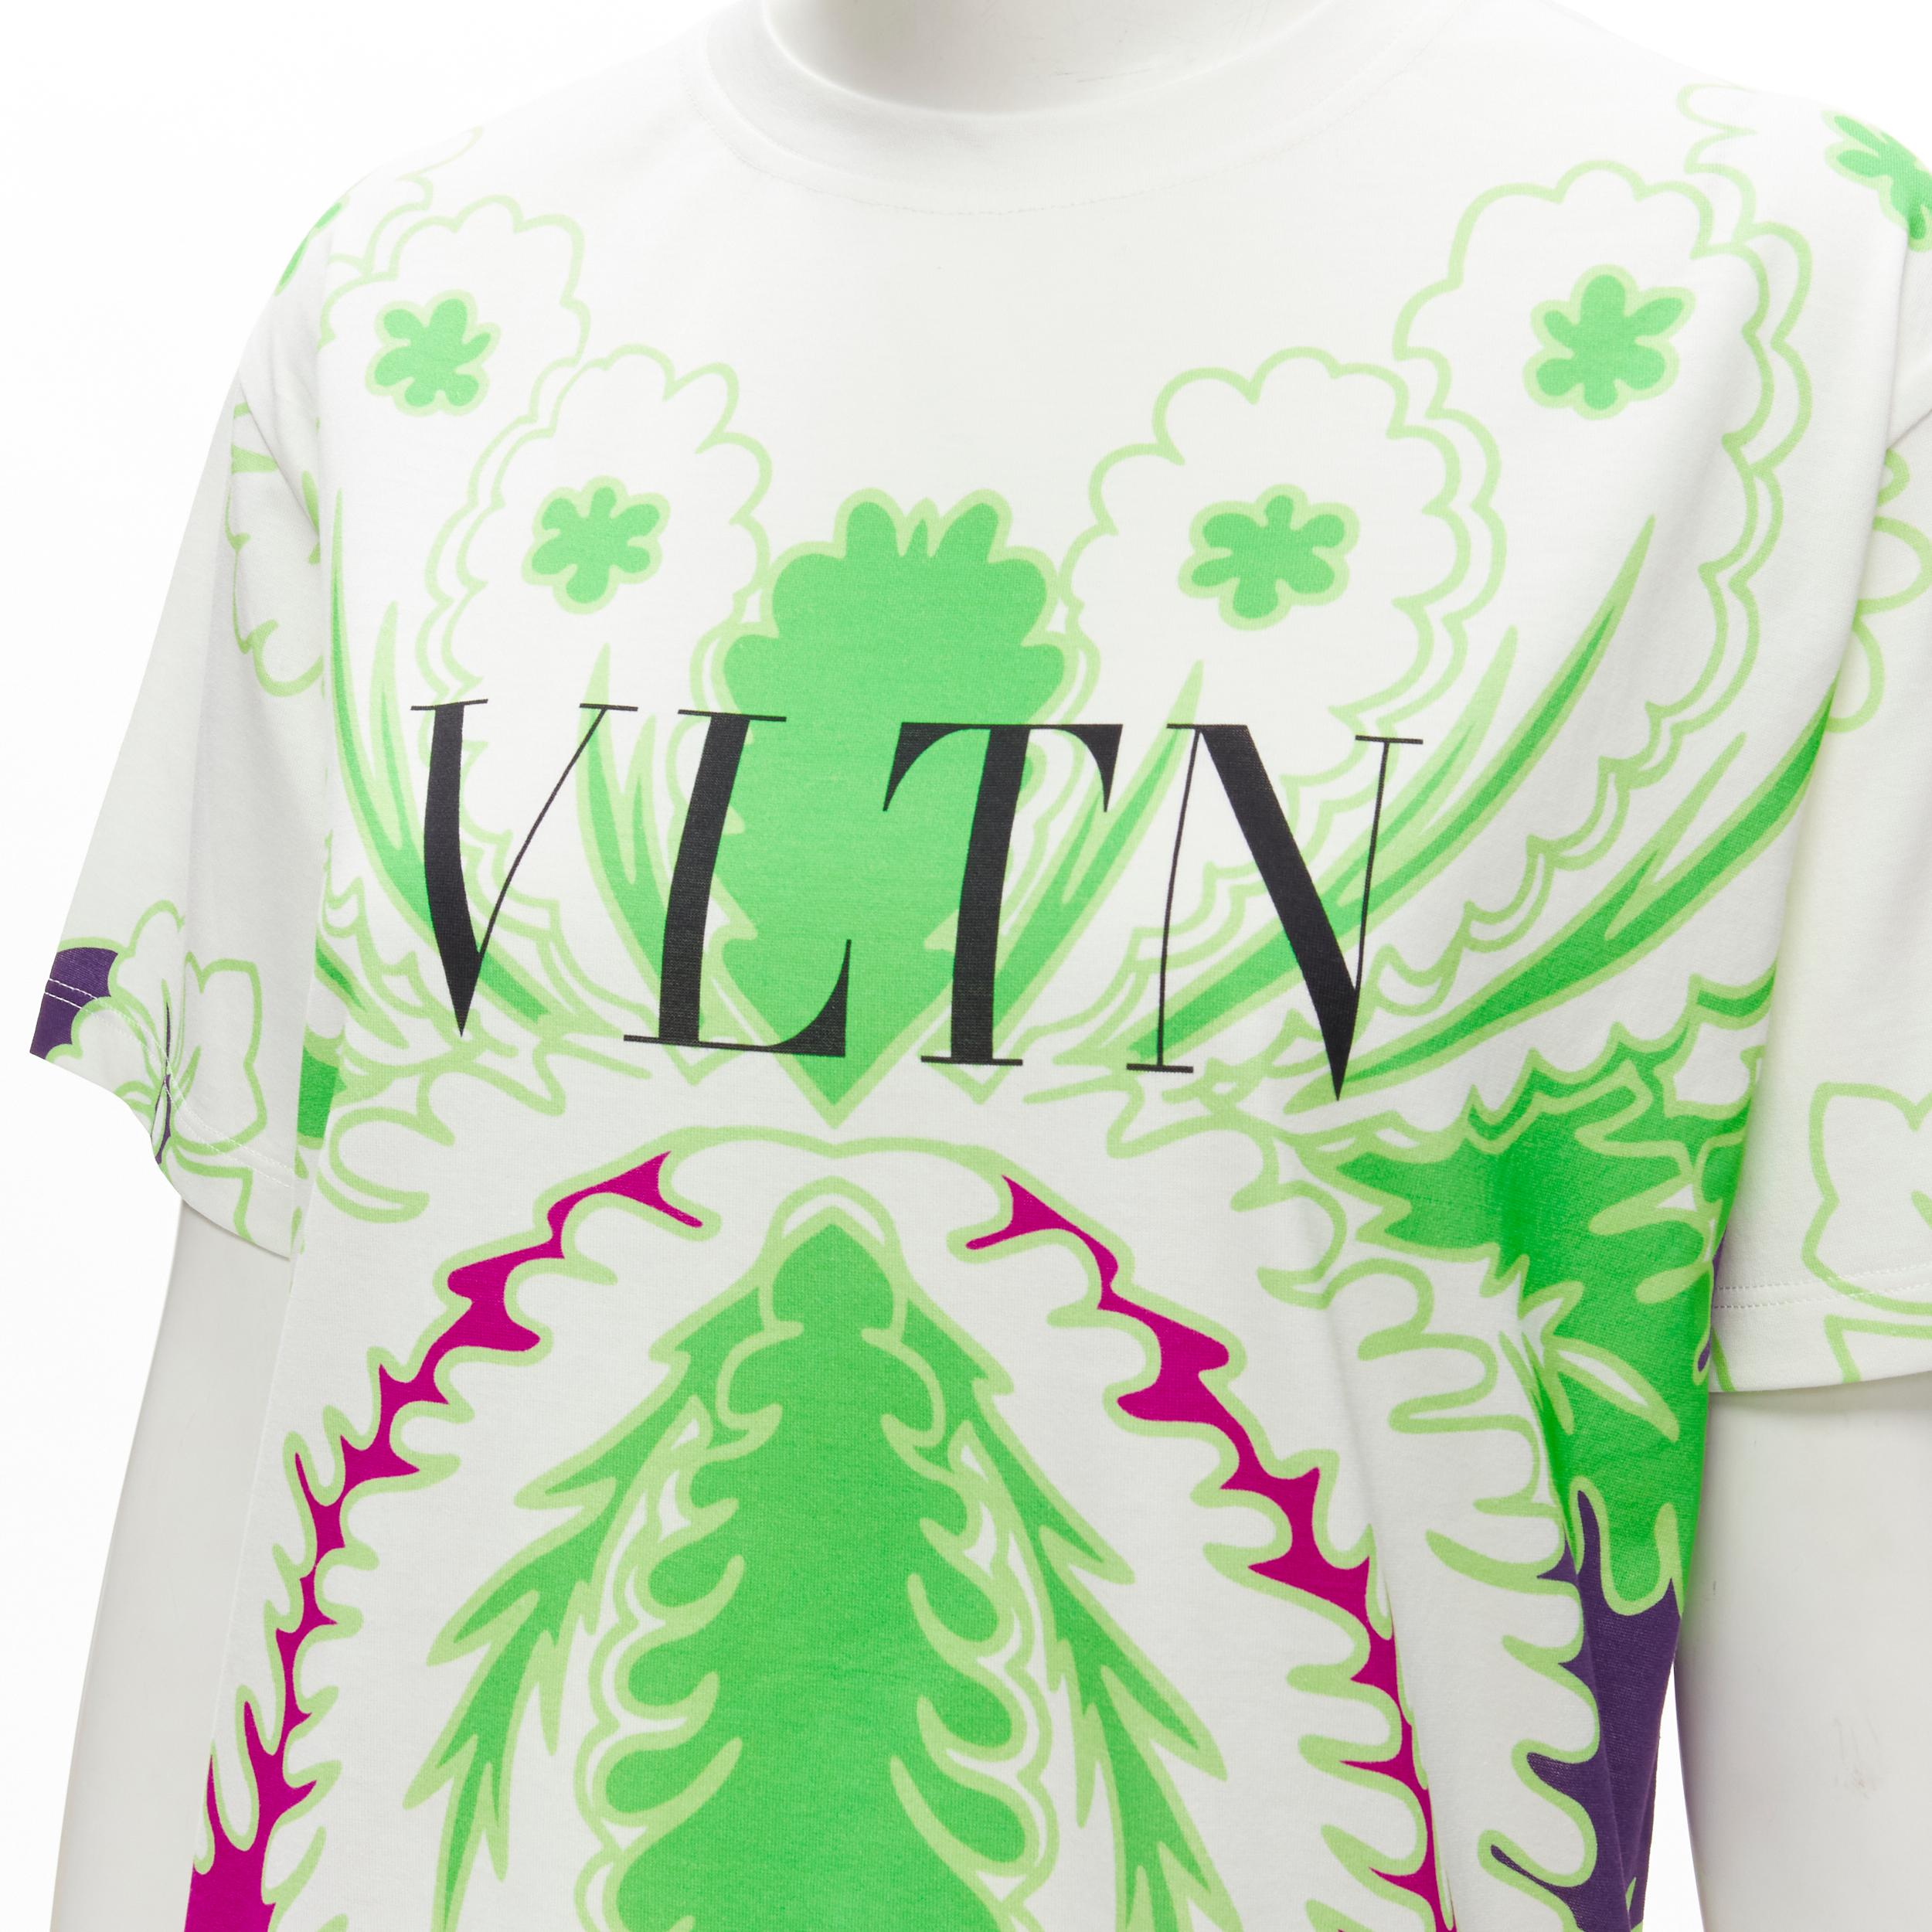 VALENTINO VLTN white neon green purple floral print cotton tshirt XS
Brand: Valentino
Material: Feels like cotton
Color: White
Pattern: Floral
Made in: Italy

CONDITION:
Condition: Excellent, this item was pre-owned and is in excellent condition.